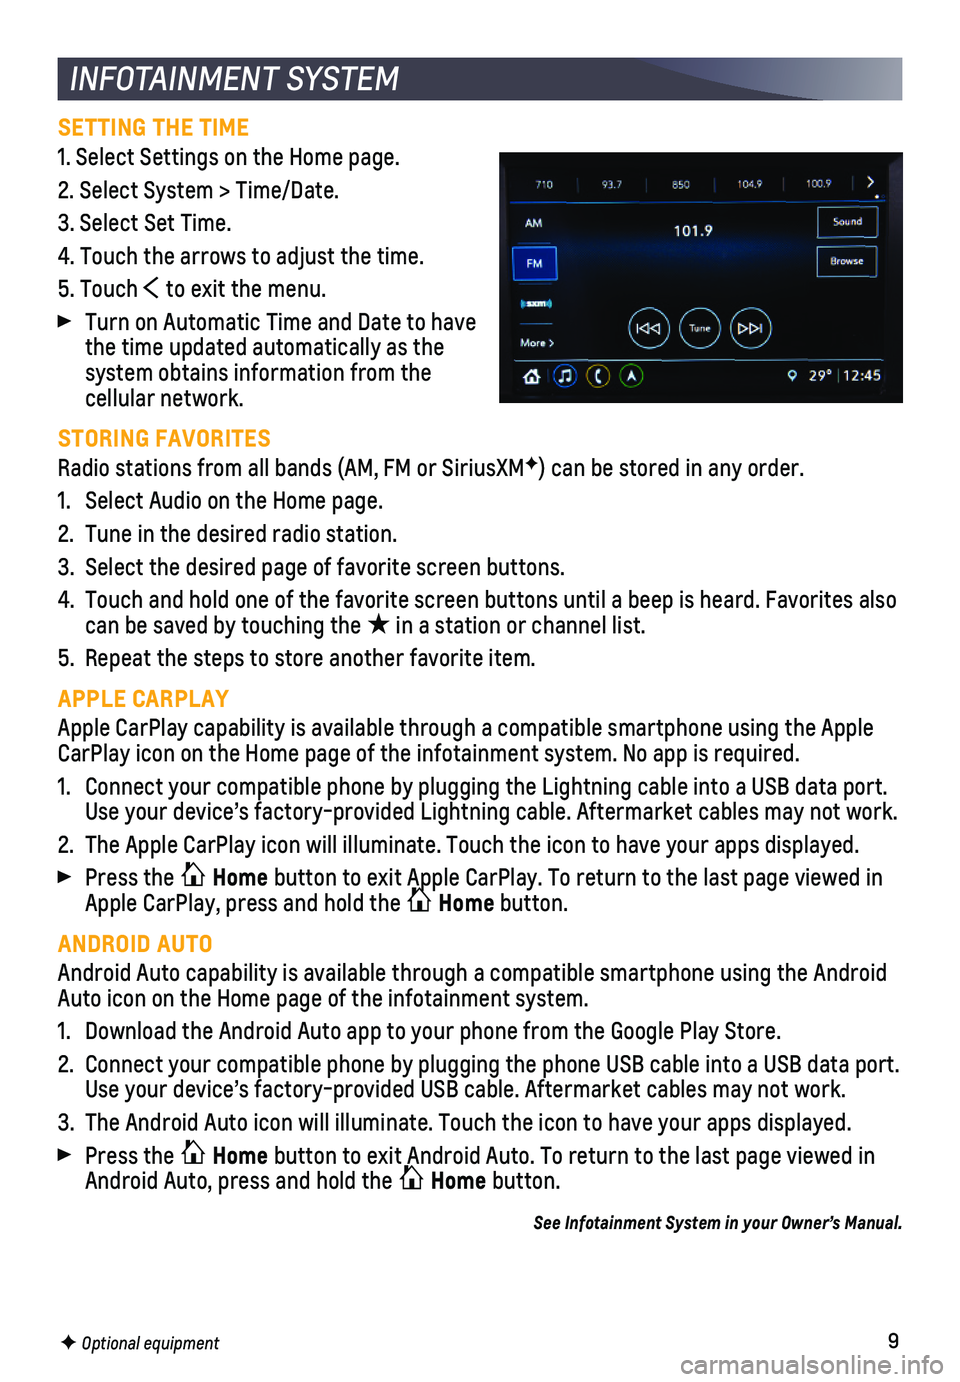 CHEVROLET SONIC 2020  Get To Know Guide 9F Optional equipment
INFOTAINMENT SYSTEM
SETTING THE TIME
1. Select Settings on the Home page. 
2. Select System > Time/Date.
3. Select Set Time.
4. Touch the arrows to adjust the time.
5. Touch  to 